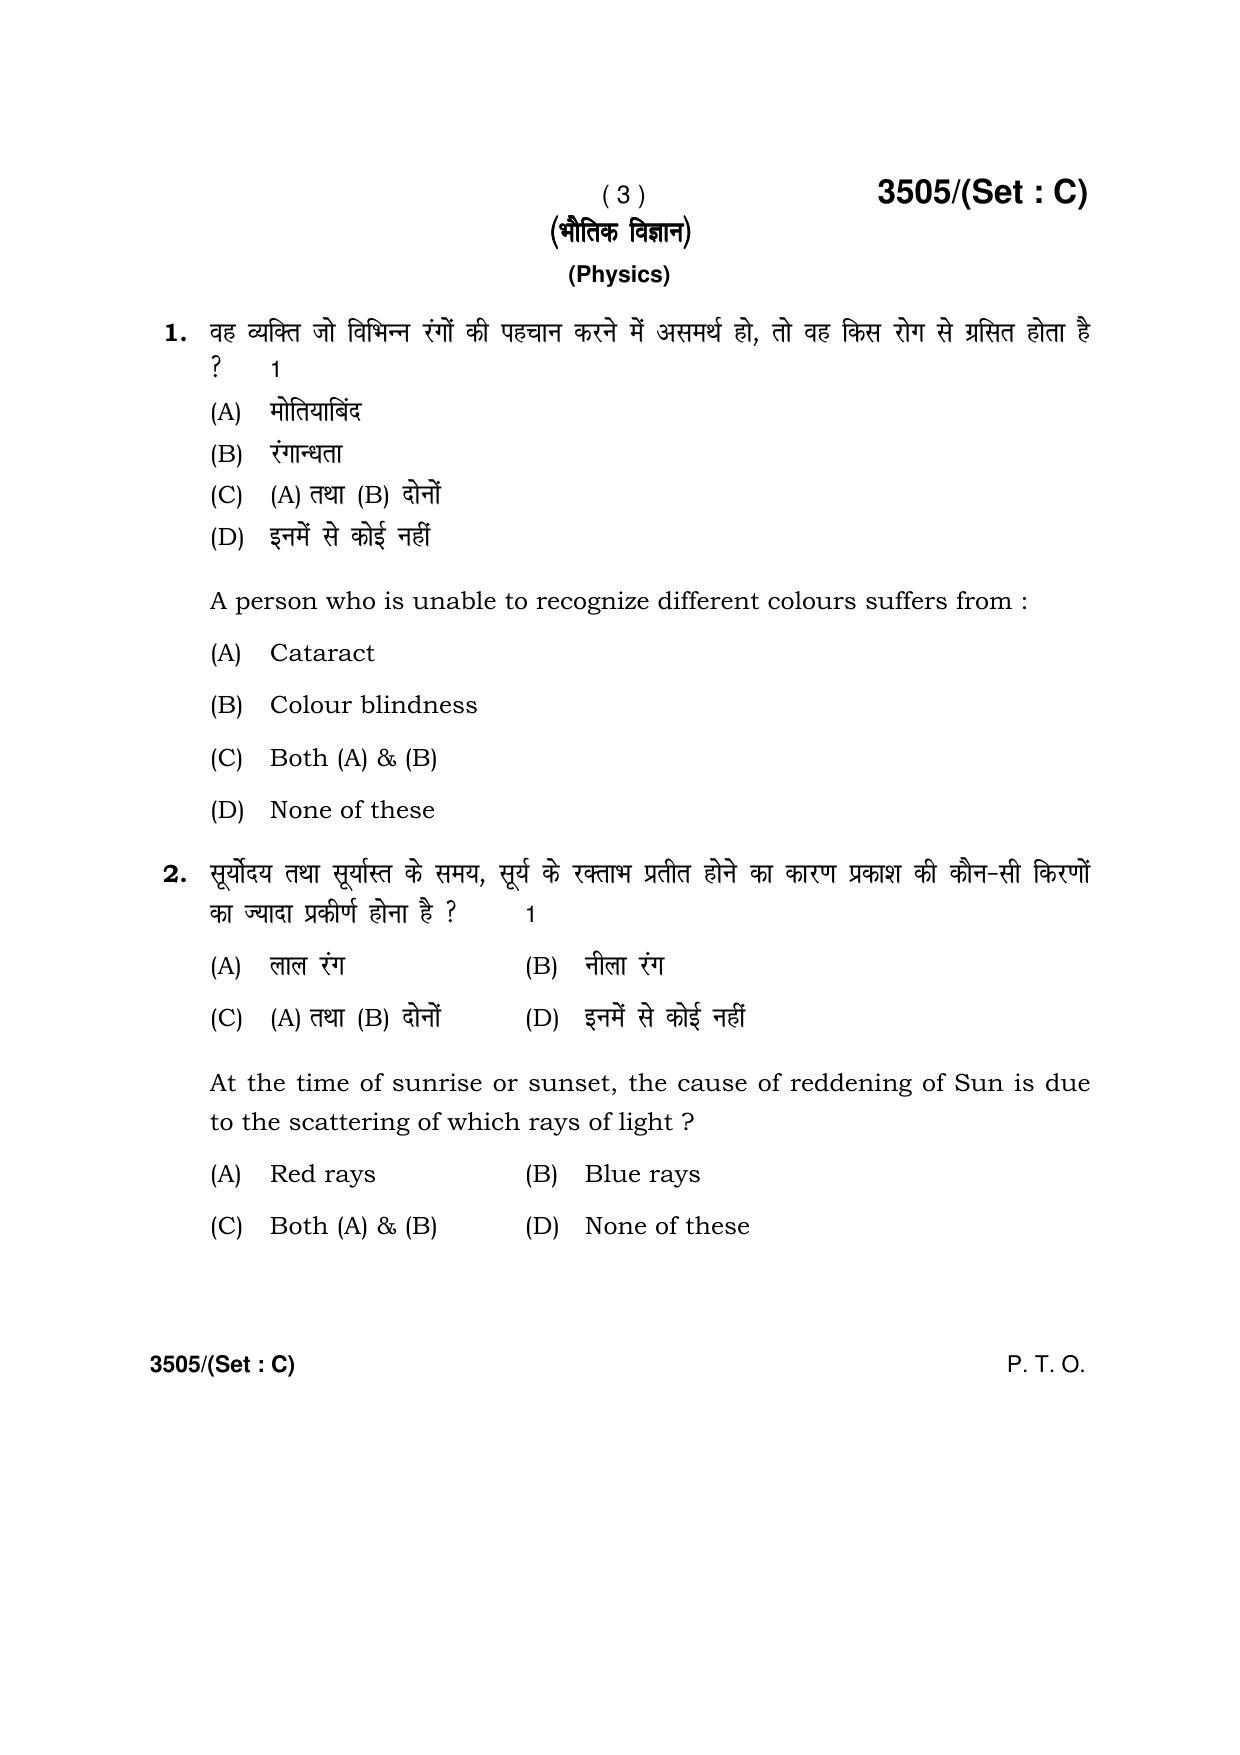 Haryana Board HBSE Class 10 Science -C 2018 Question Paper - Page 3